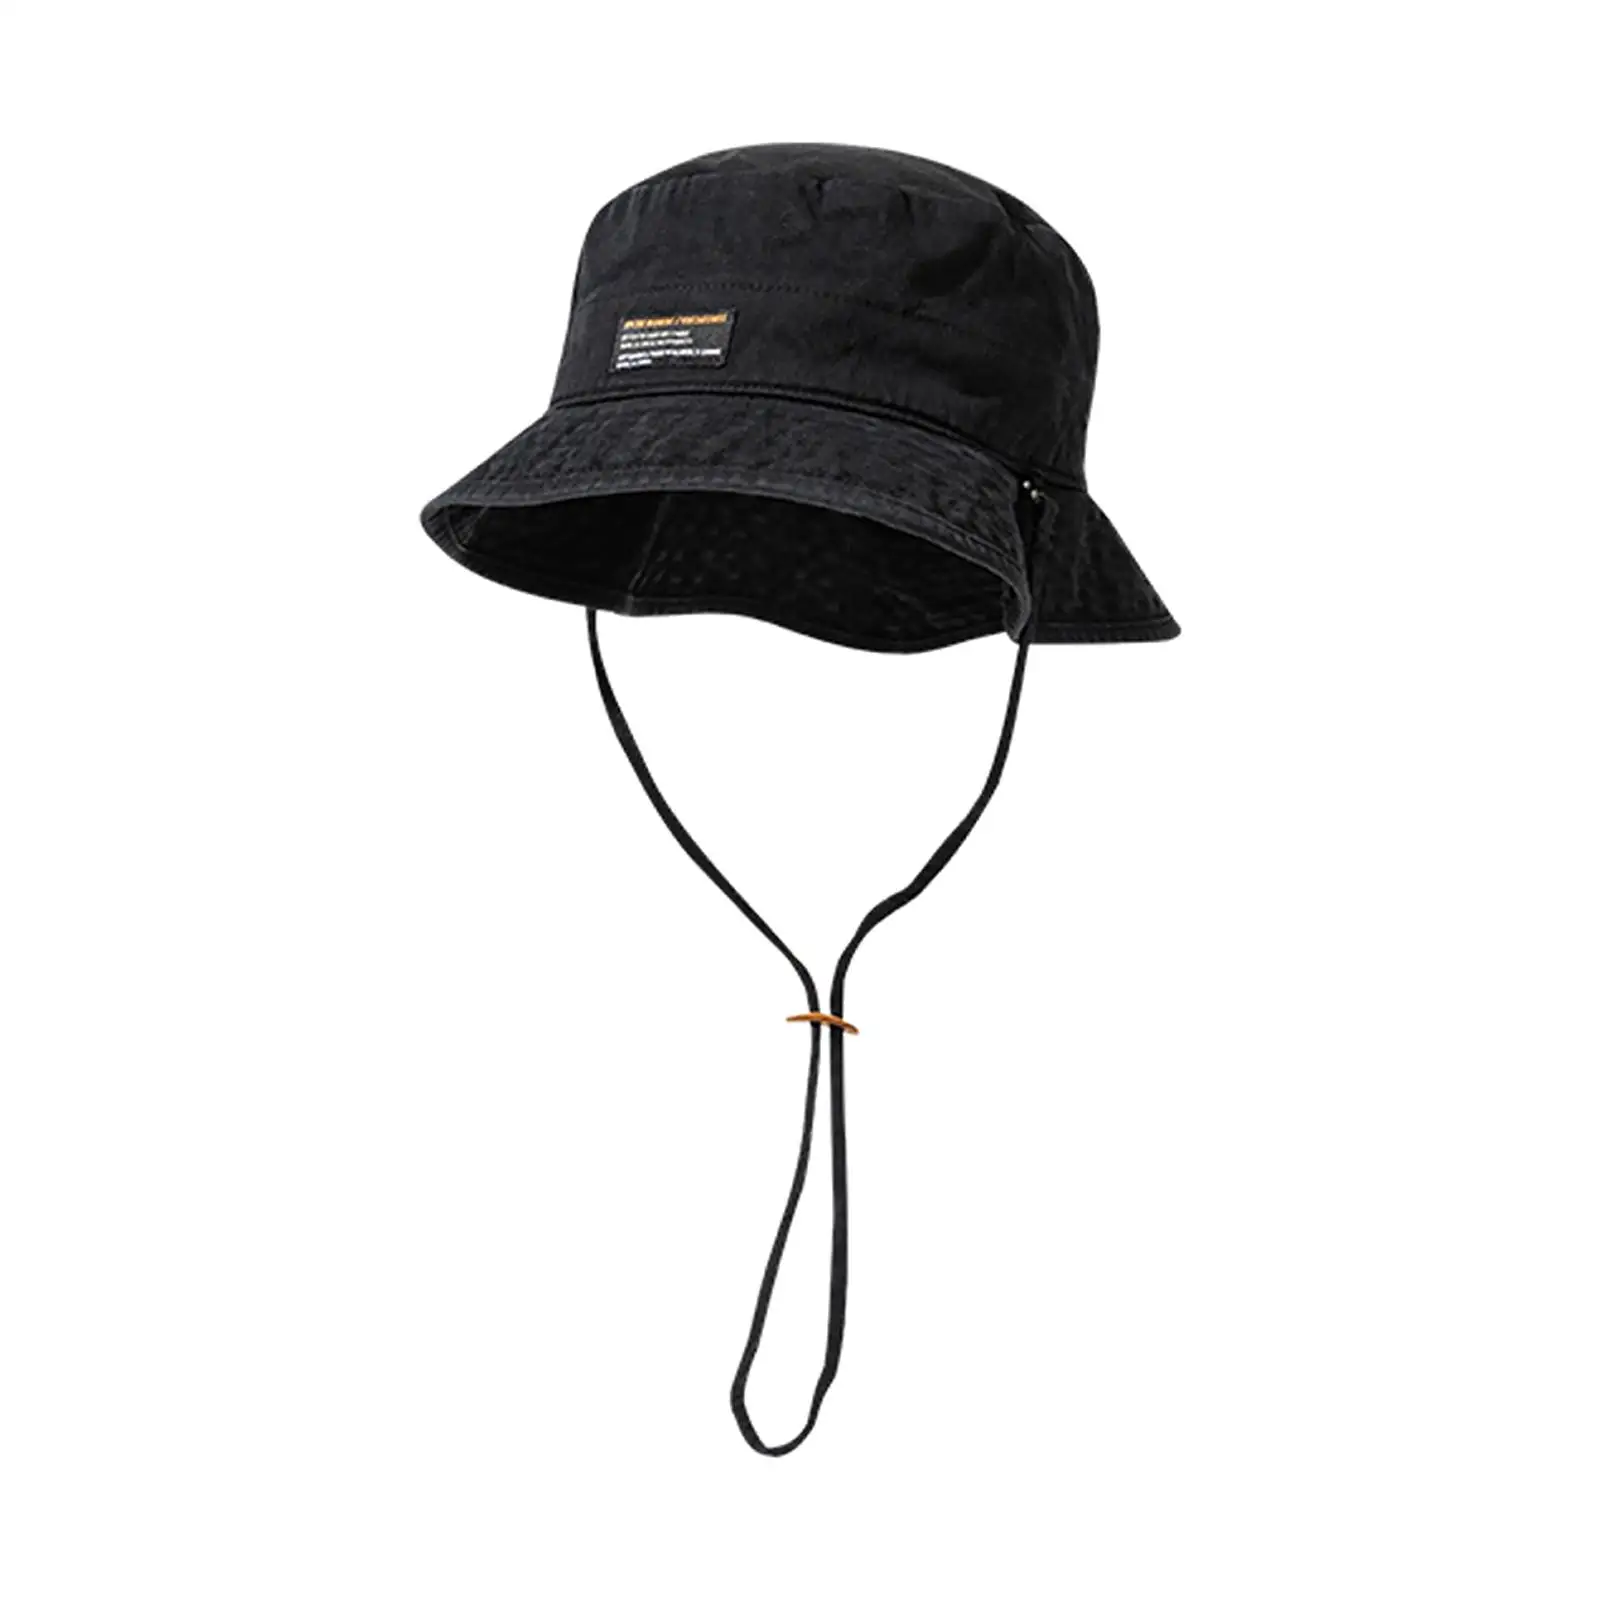 Unisex Bucket Hat Double Sided Cotton Sun Protection Travel Outdoor Beach